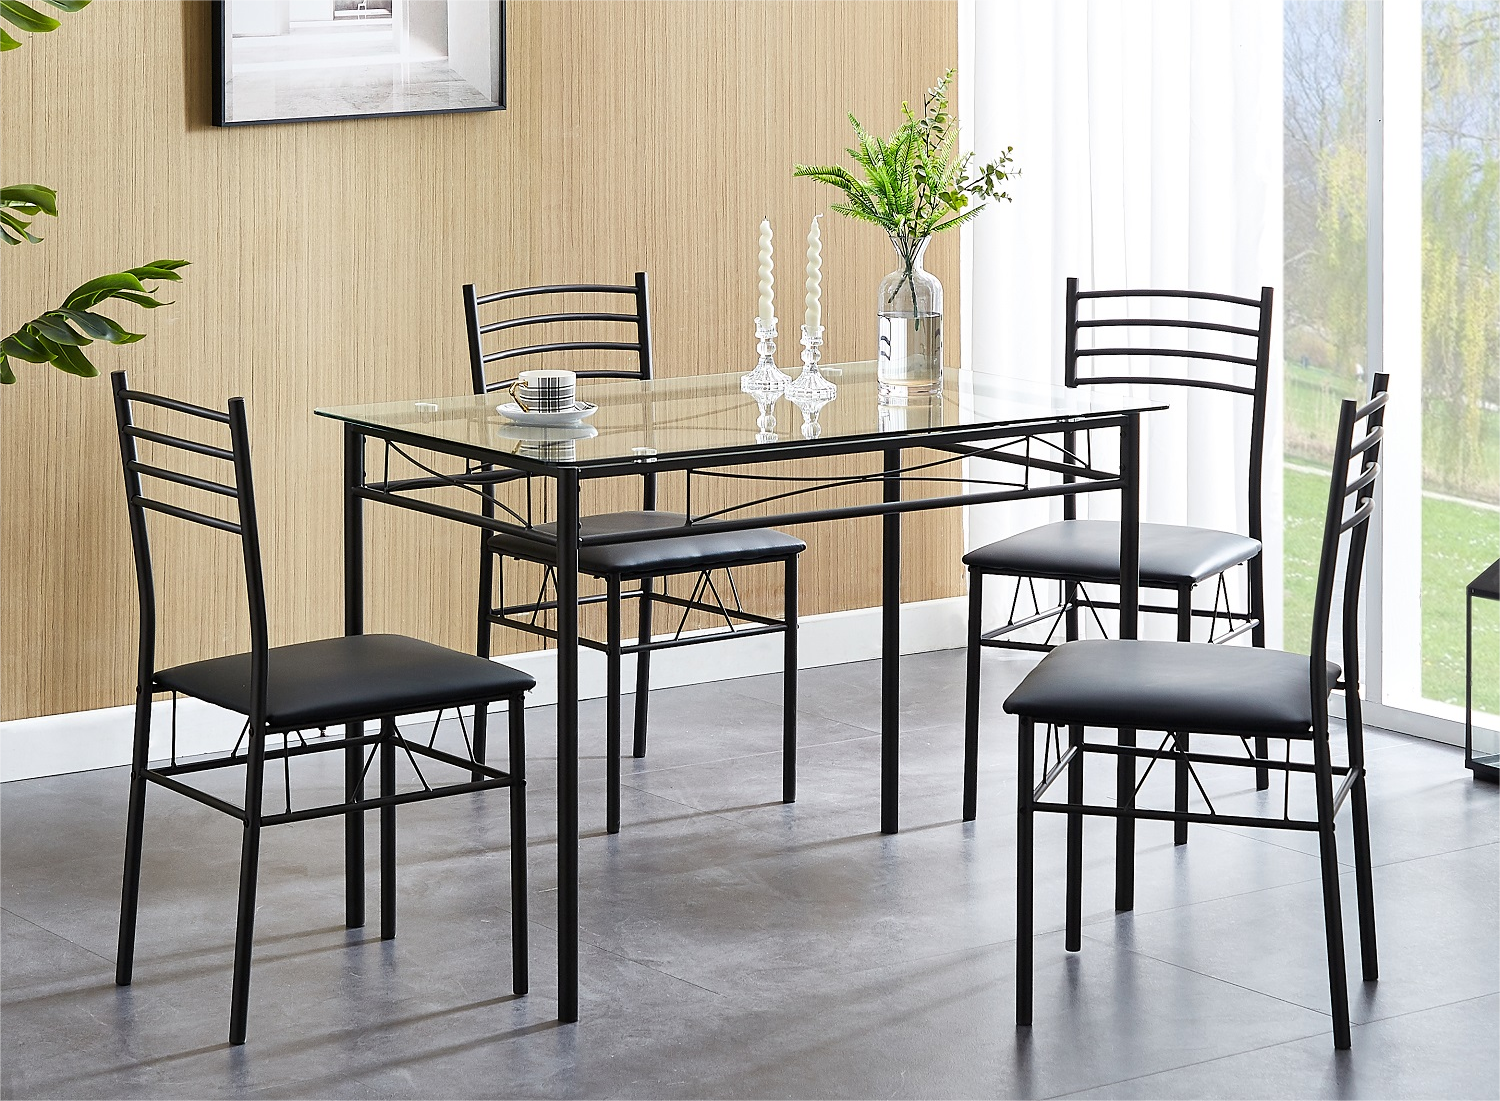 The Dining Table: Enhance Your Dining Experience with VECELO's Dining Table Sets